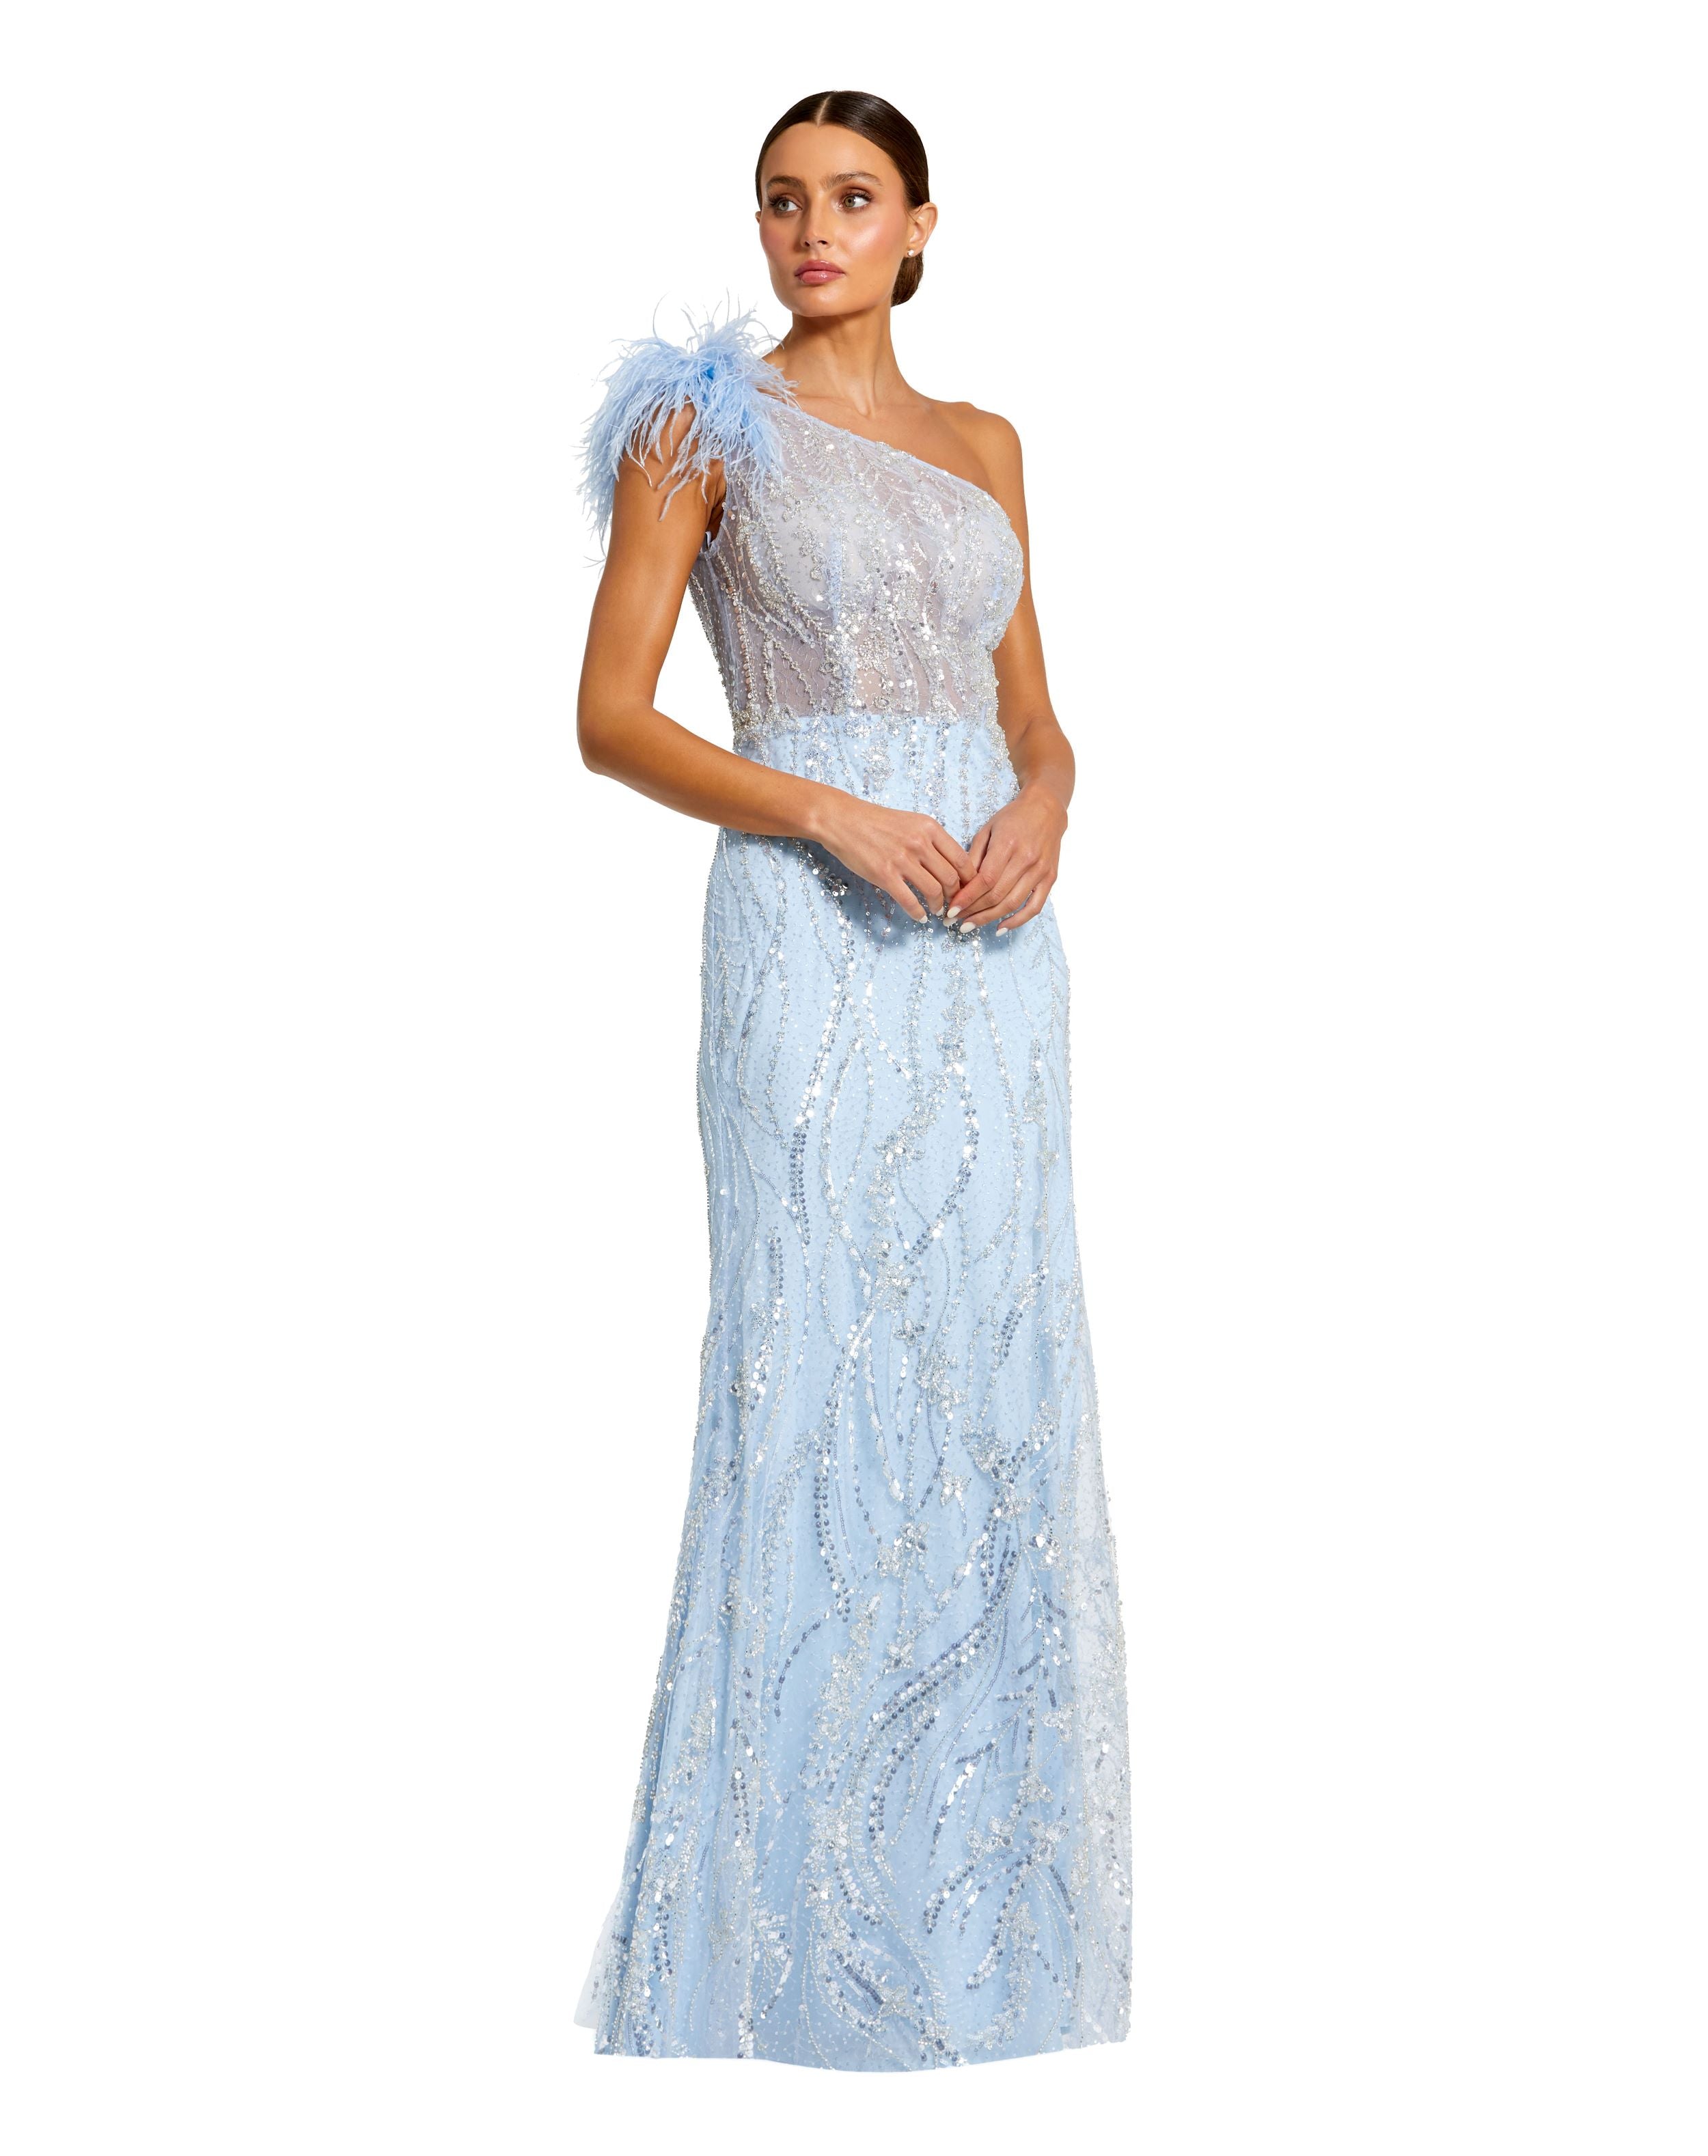 Feathered One Shoulder Embroidered Applique Gown